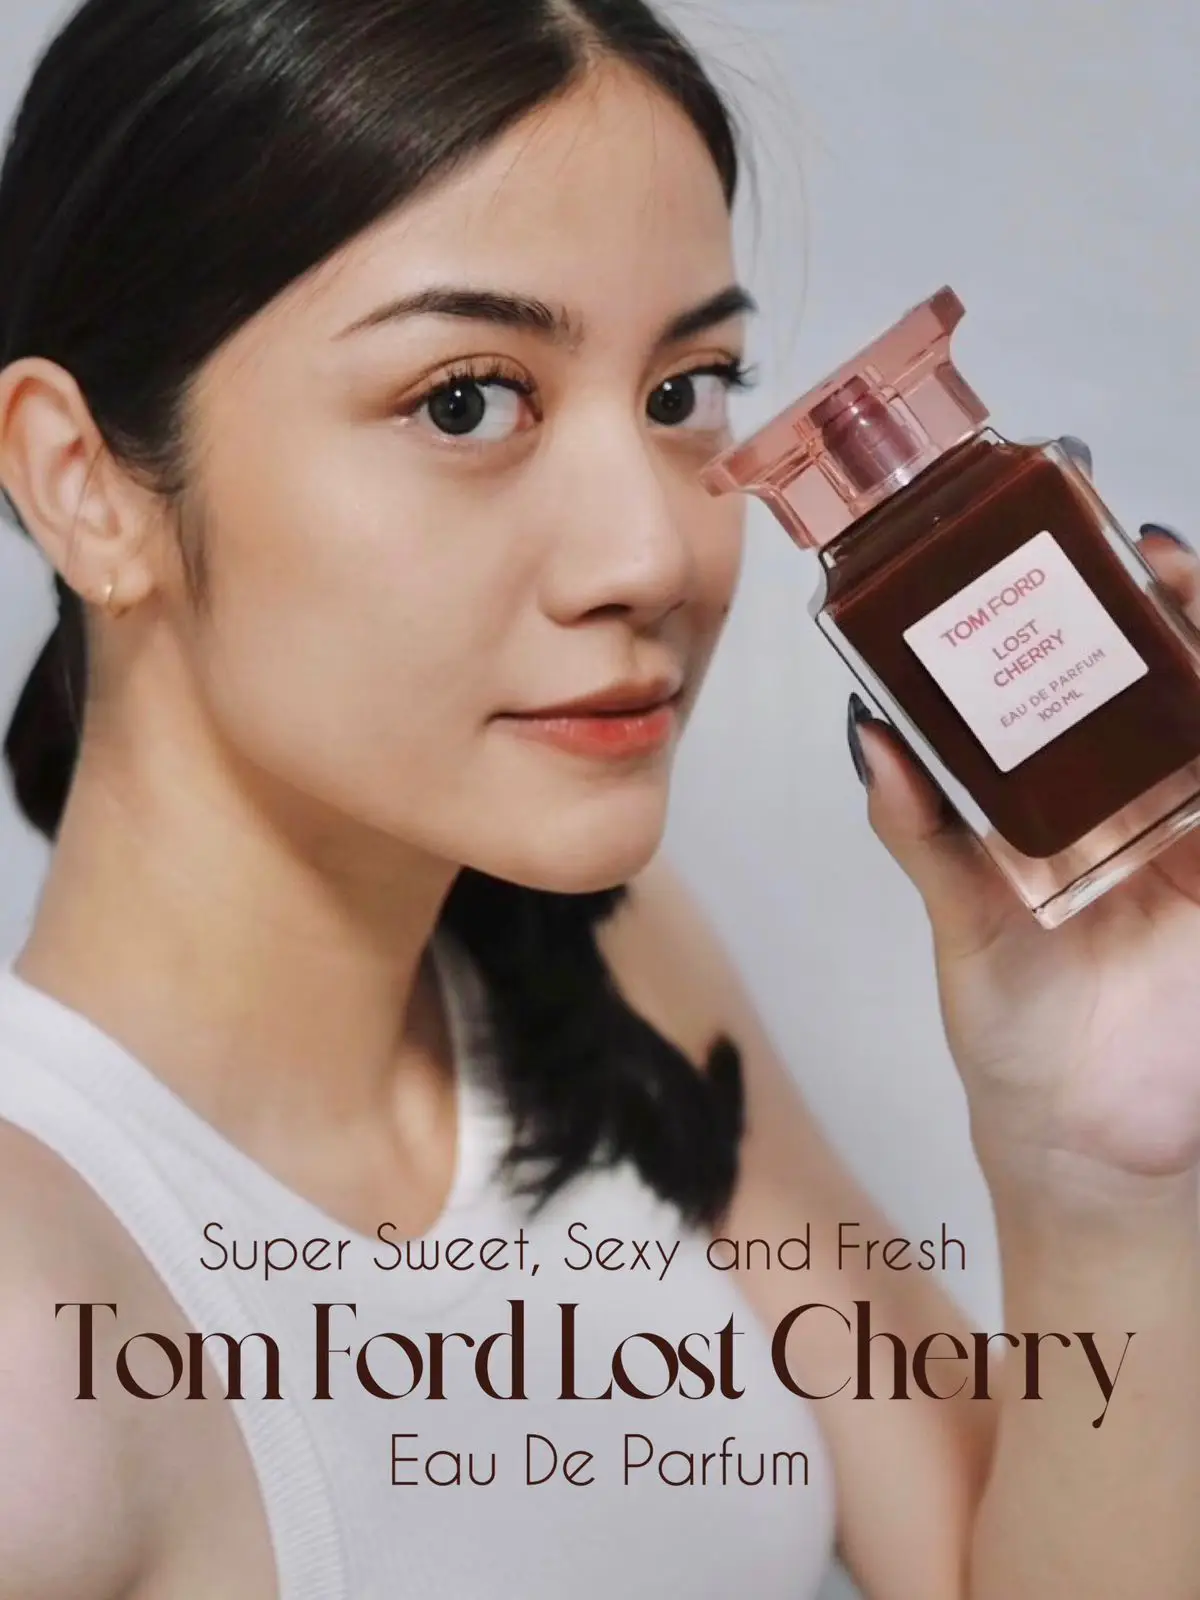 7 Best Tom Ford Lost Cherry Dupes: Sexy, Cherry Fragrances